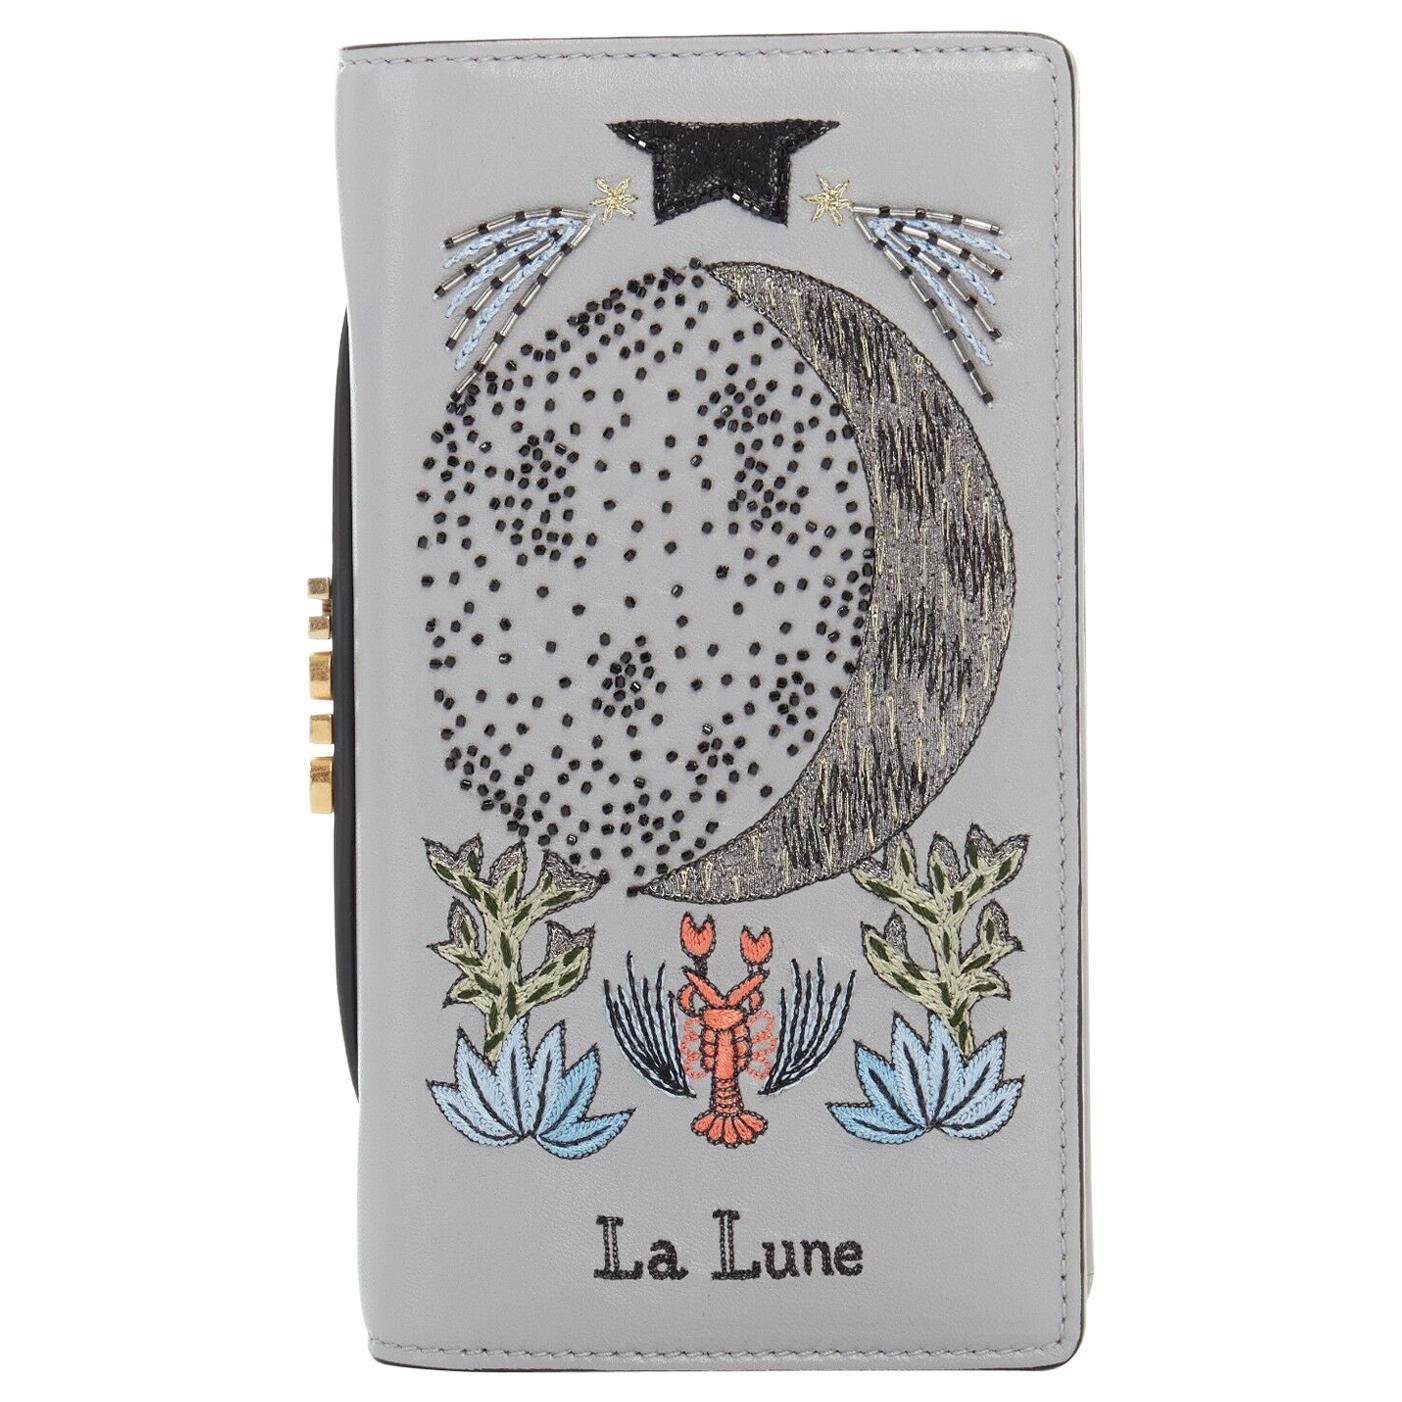 CHRISTIAN DIOR SS17 La Lune Tarot embroidered grey leather mini clutch pouch bag